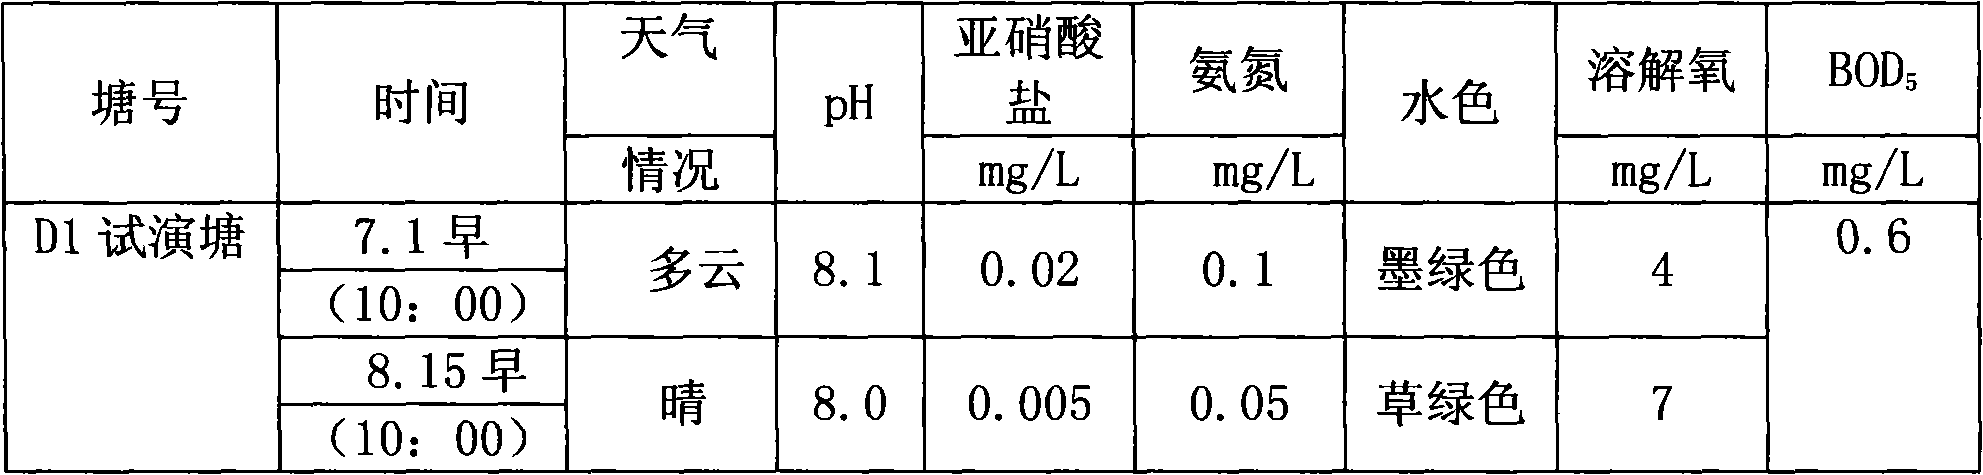 Method for preparing culture environment purifying agent by spore fermentation waste liquid